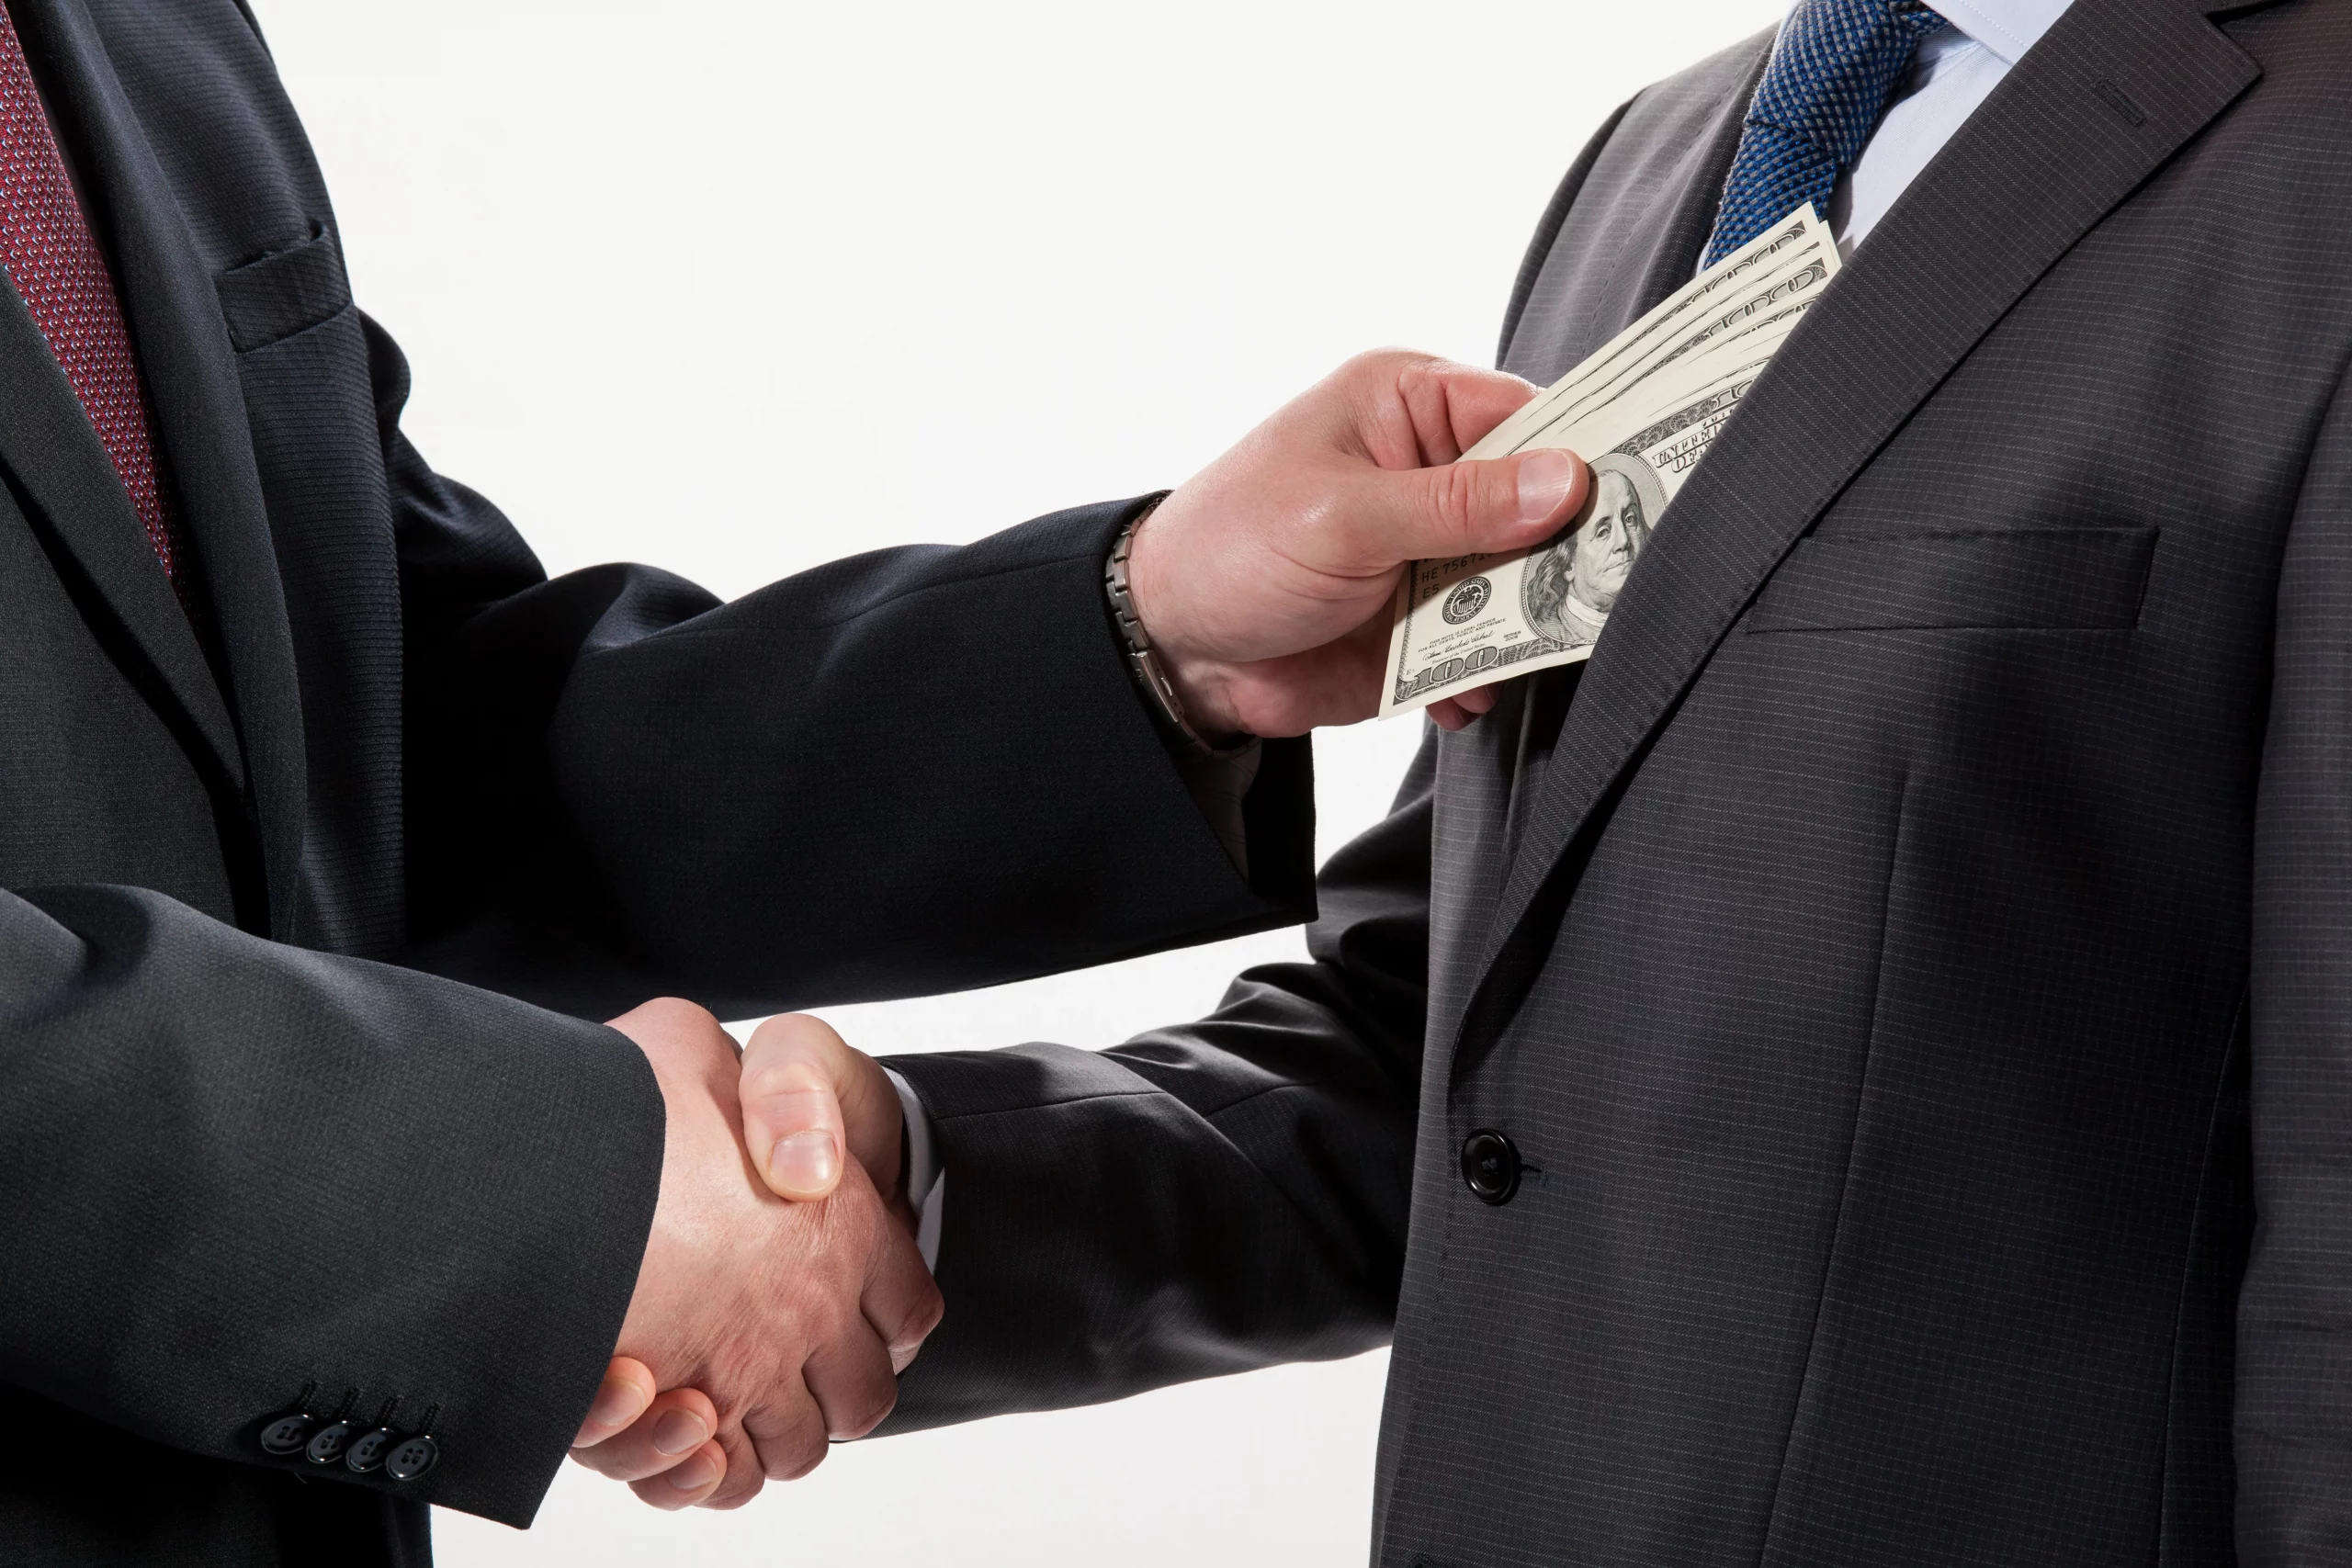 Types of bribery and Public Authorities